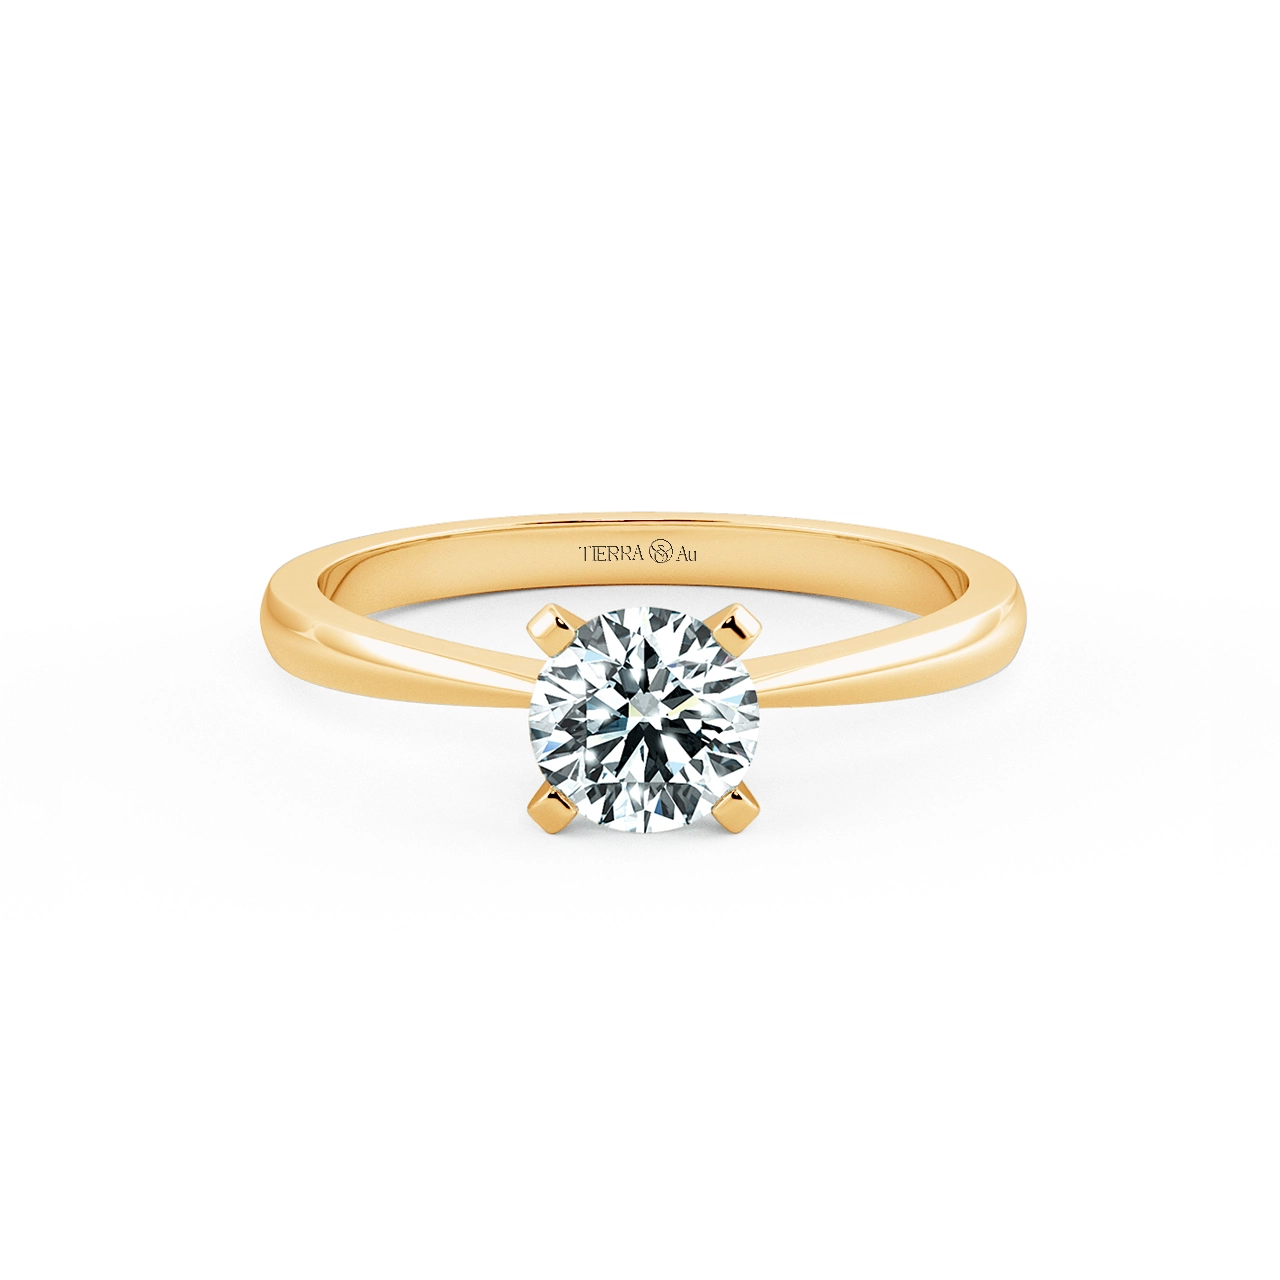 Four Prongs Solitaire Peg-head Engagement Ring NCH1103